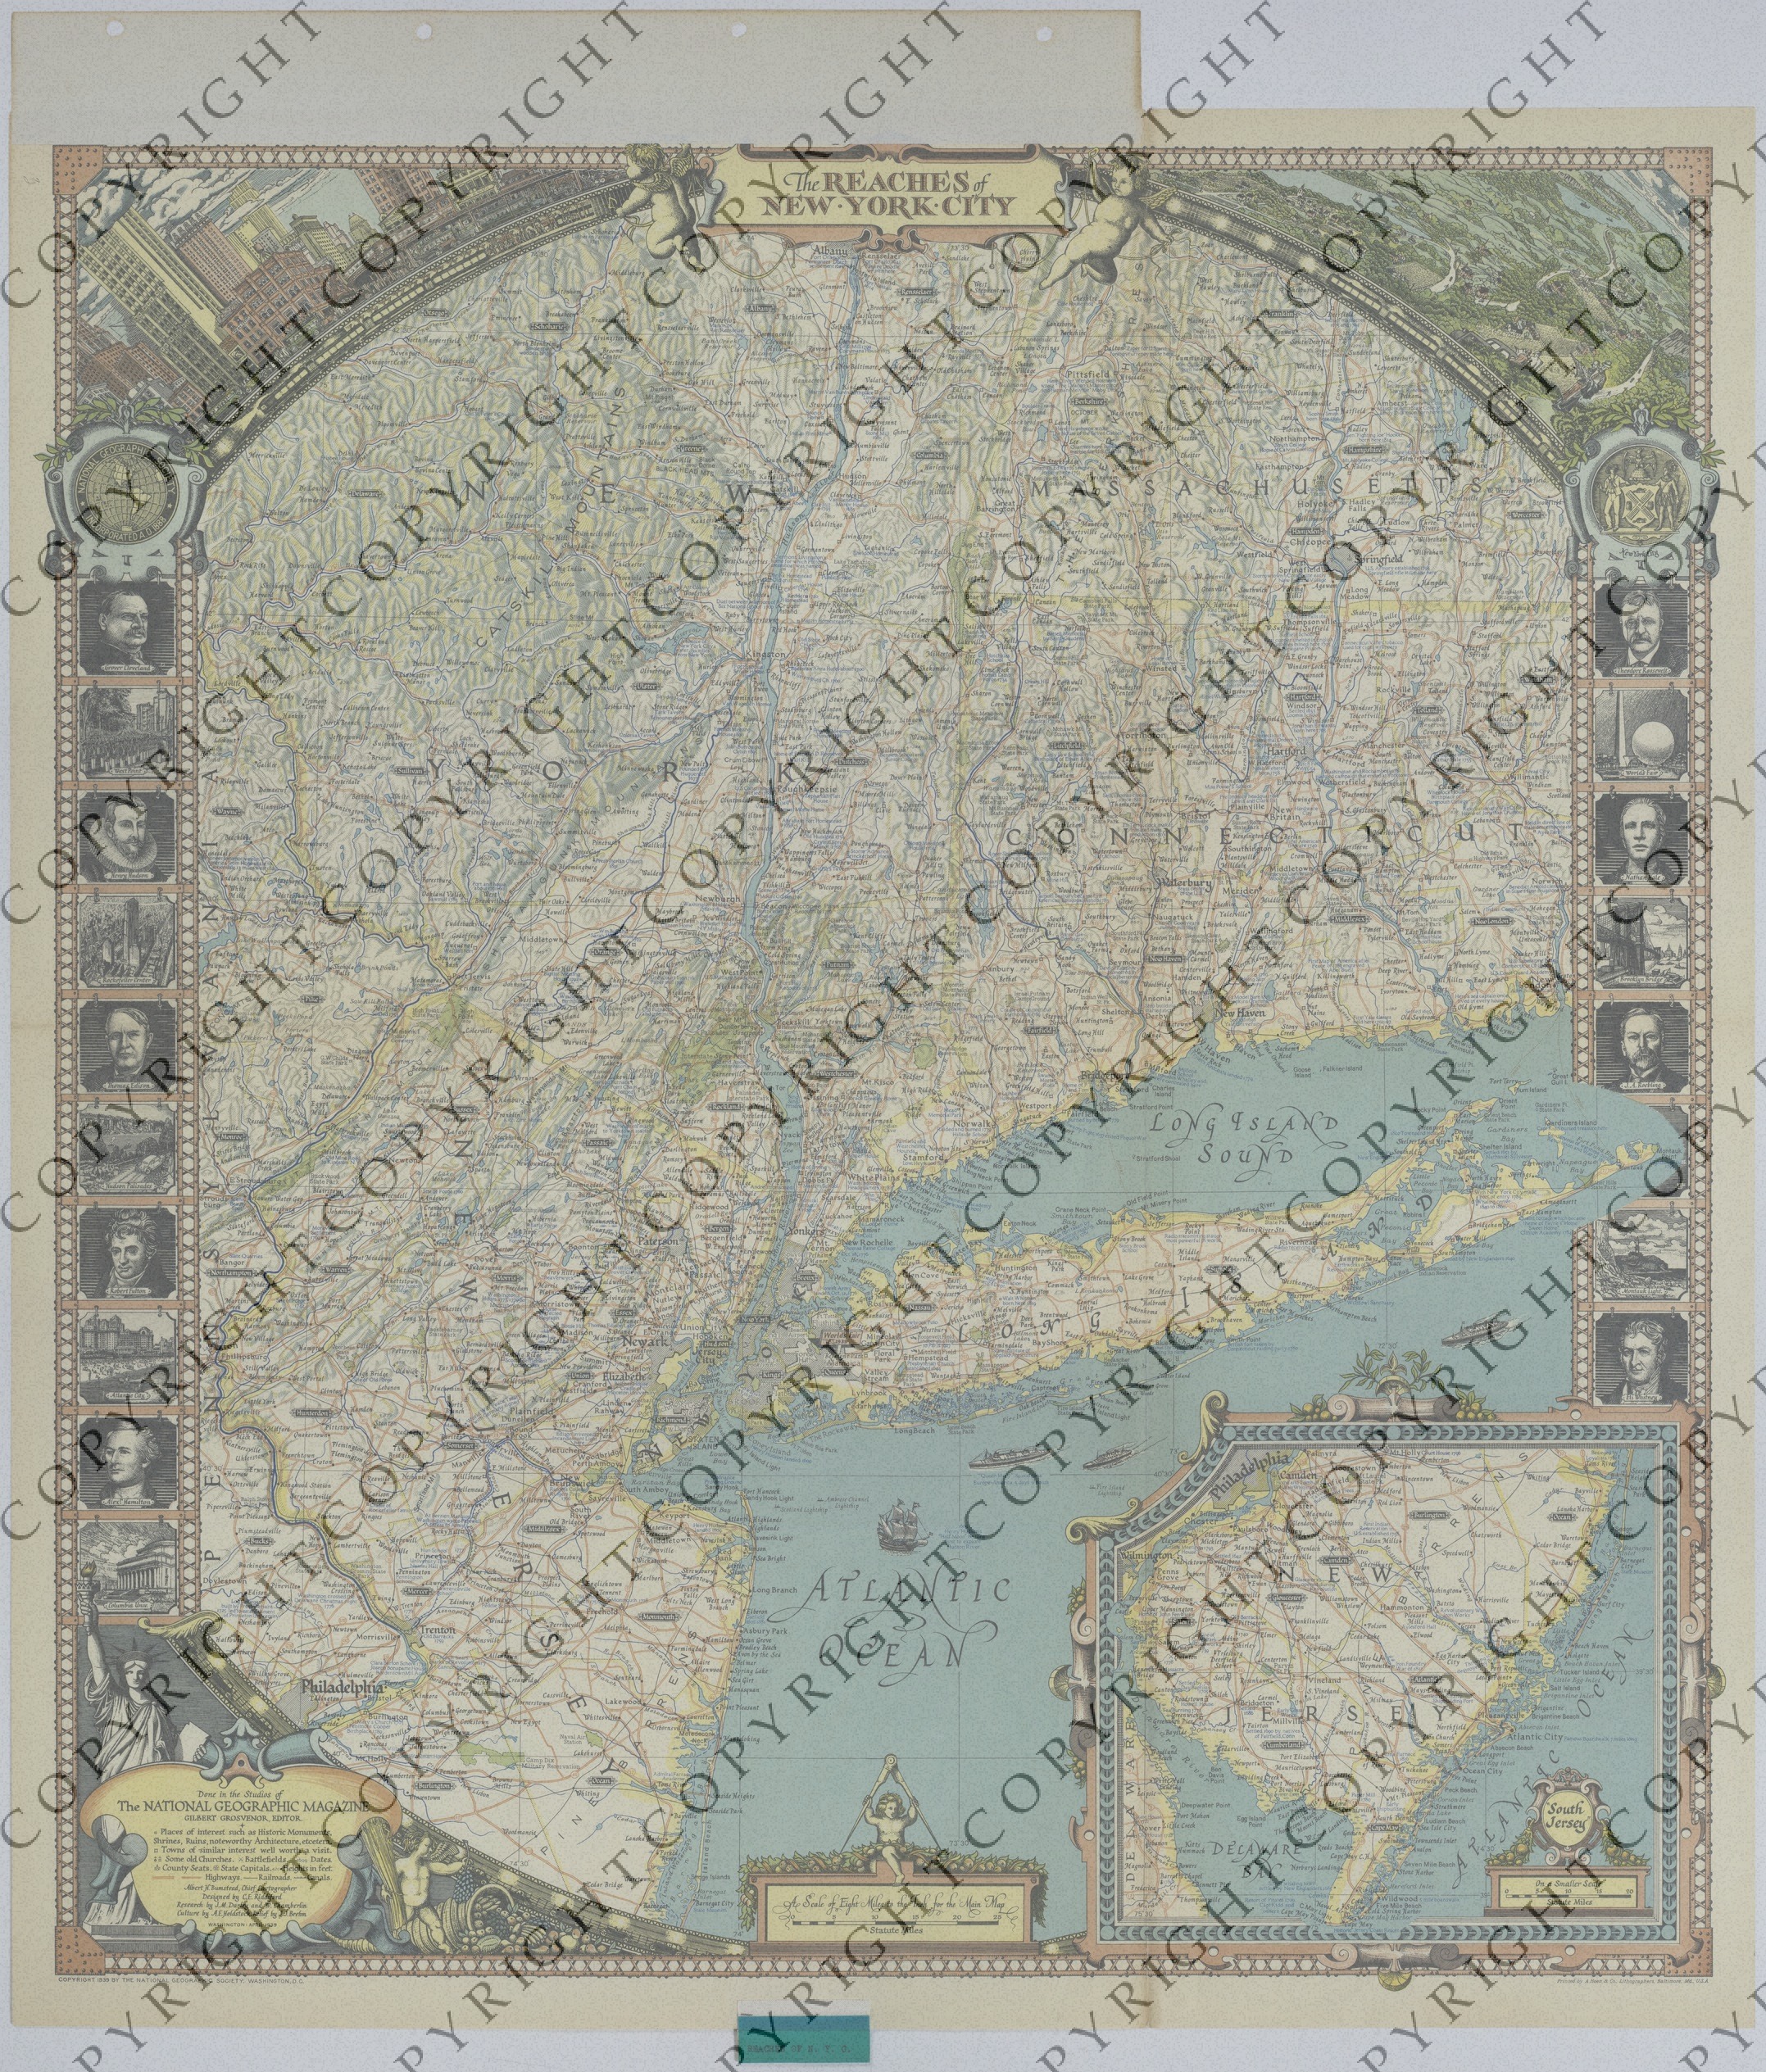 Map of the Reaches of New York City